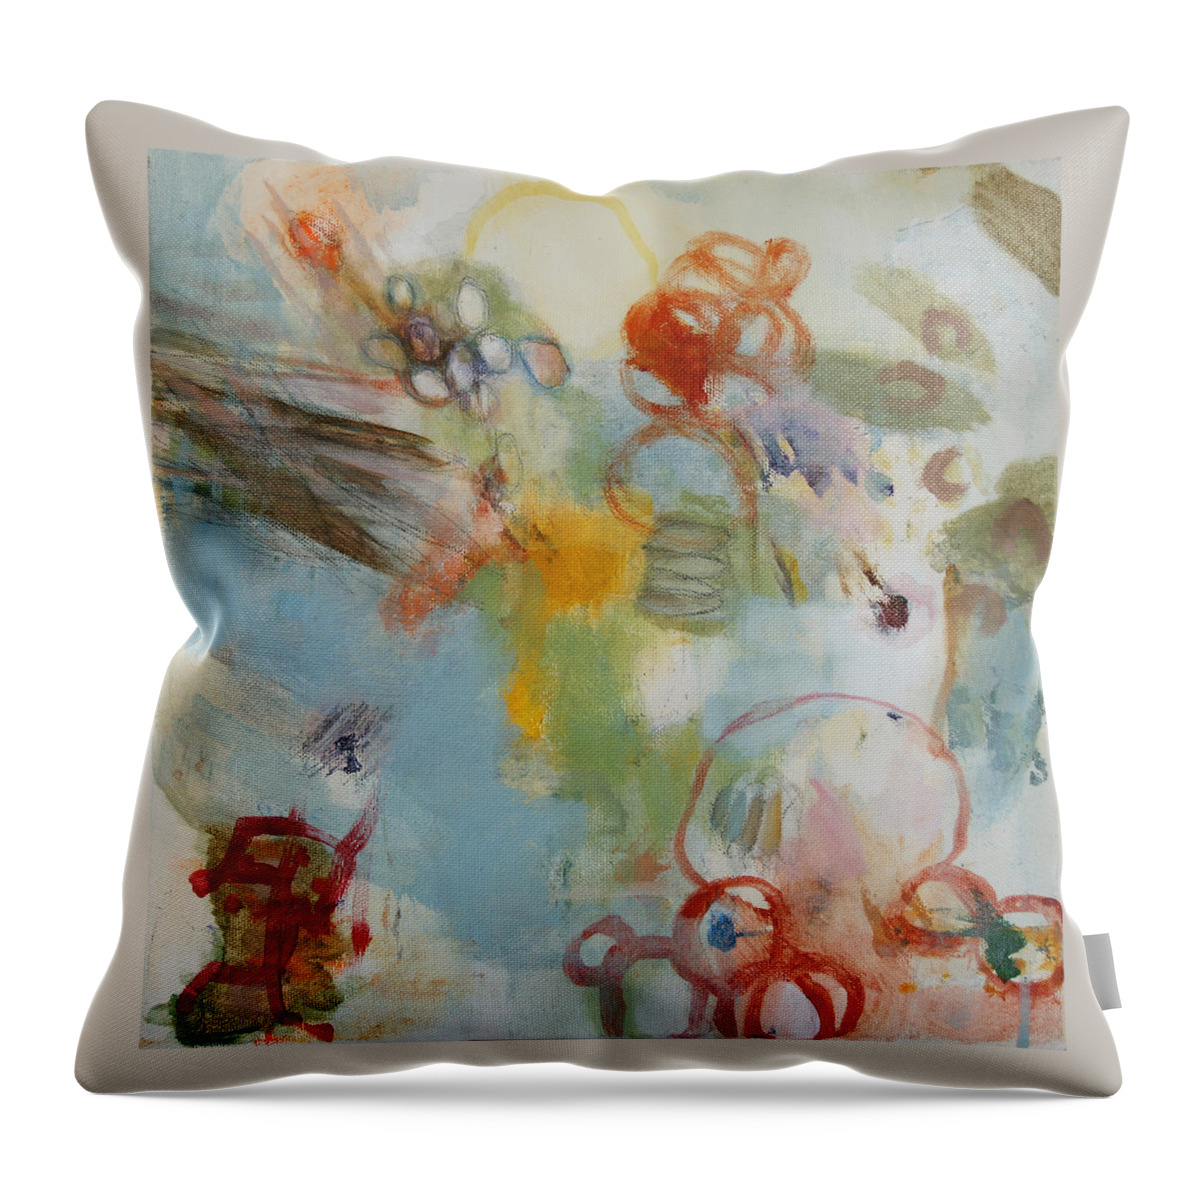 Abstract Throw Pillow featuring the painting Early Morning Whimsy by Janet Zoya